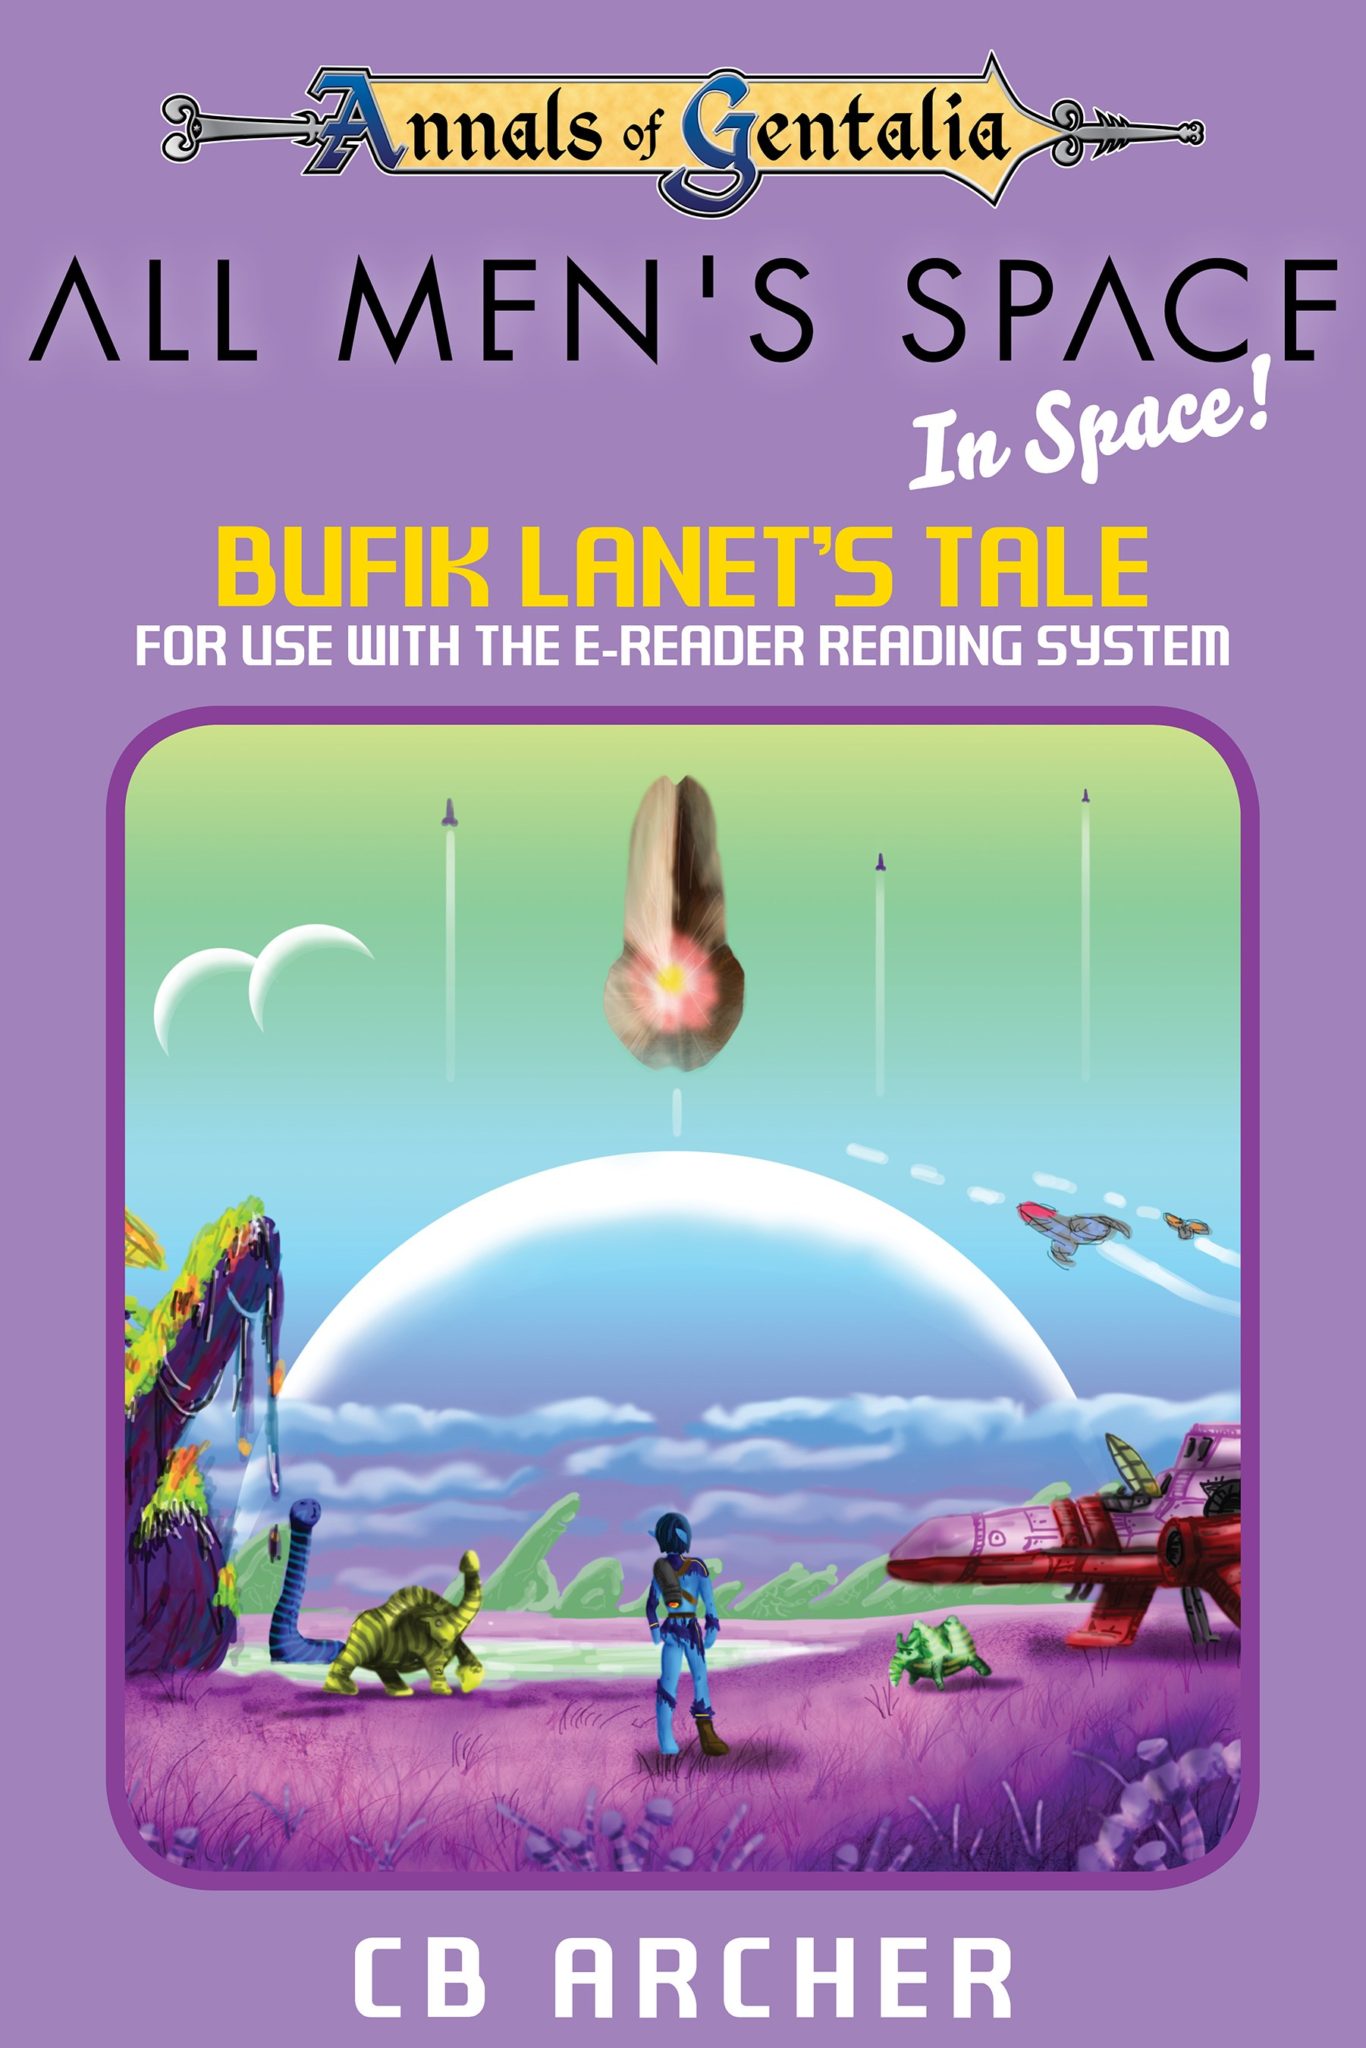 FREE: All Men’s Space – In Space!: Bufik Lanet’s Tale by CB Archer